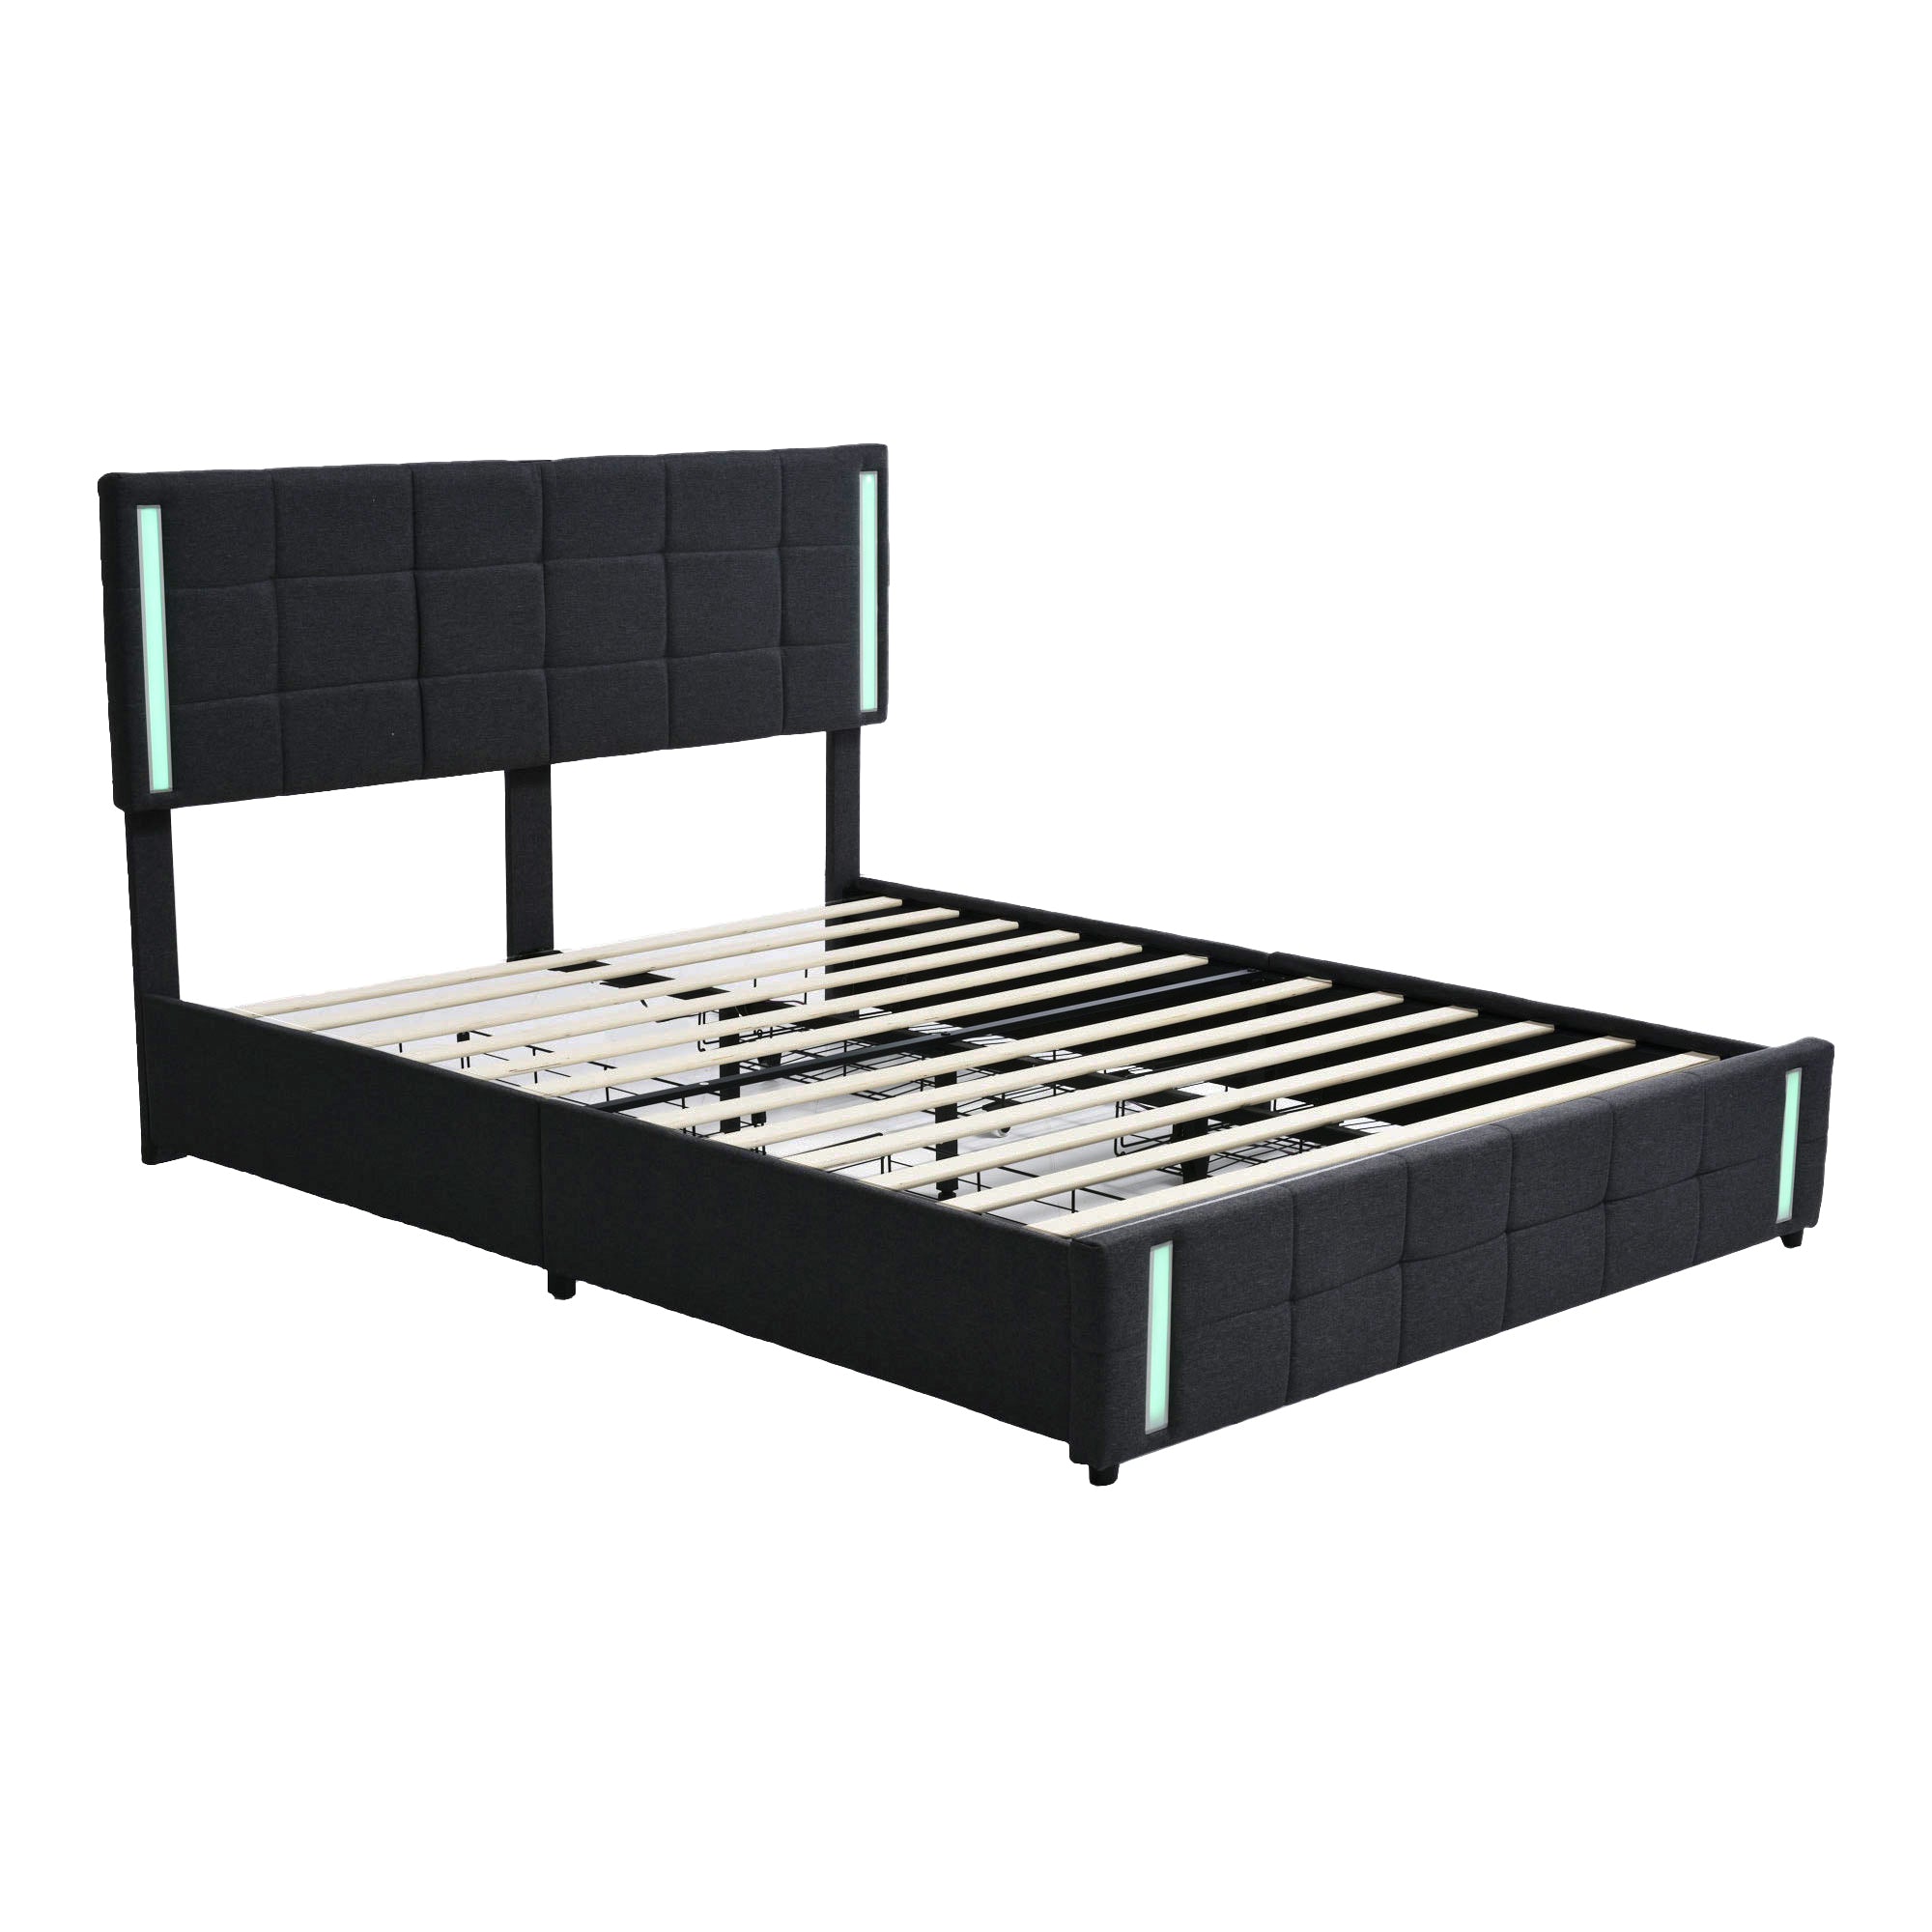 Queen Size Upholstered Platform Bed with LED Lights and USB Charging, Storage Bed with 4 Drawers, Dark Gray